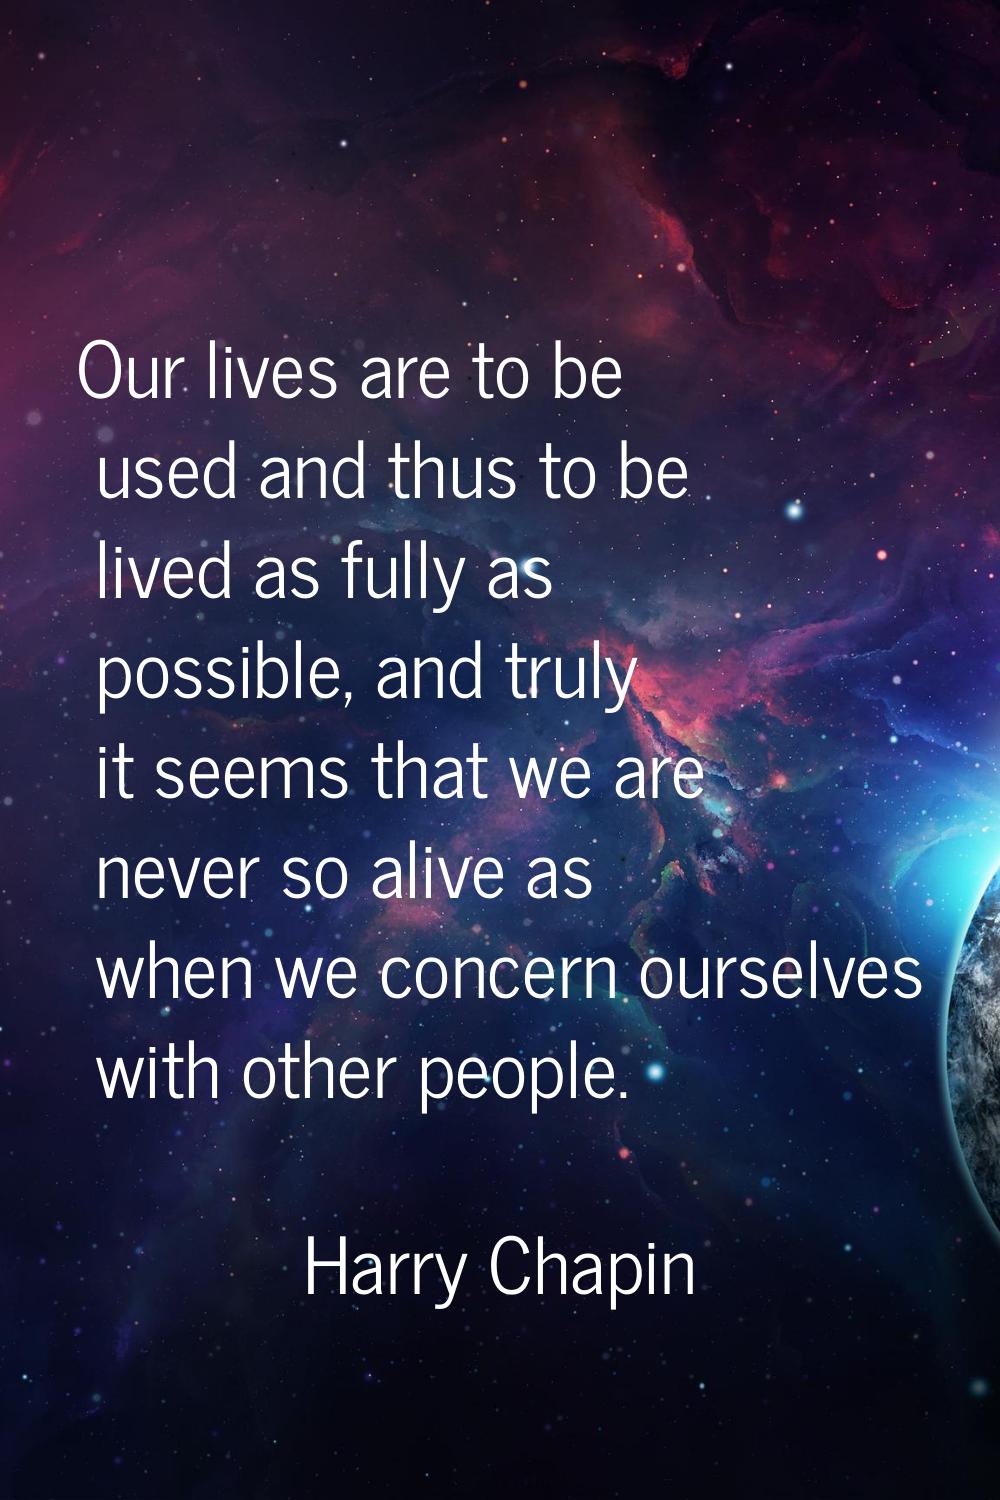 Our lives are to be used and thus to be lived as fully as possible, and truly it seems that we are 